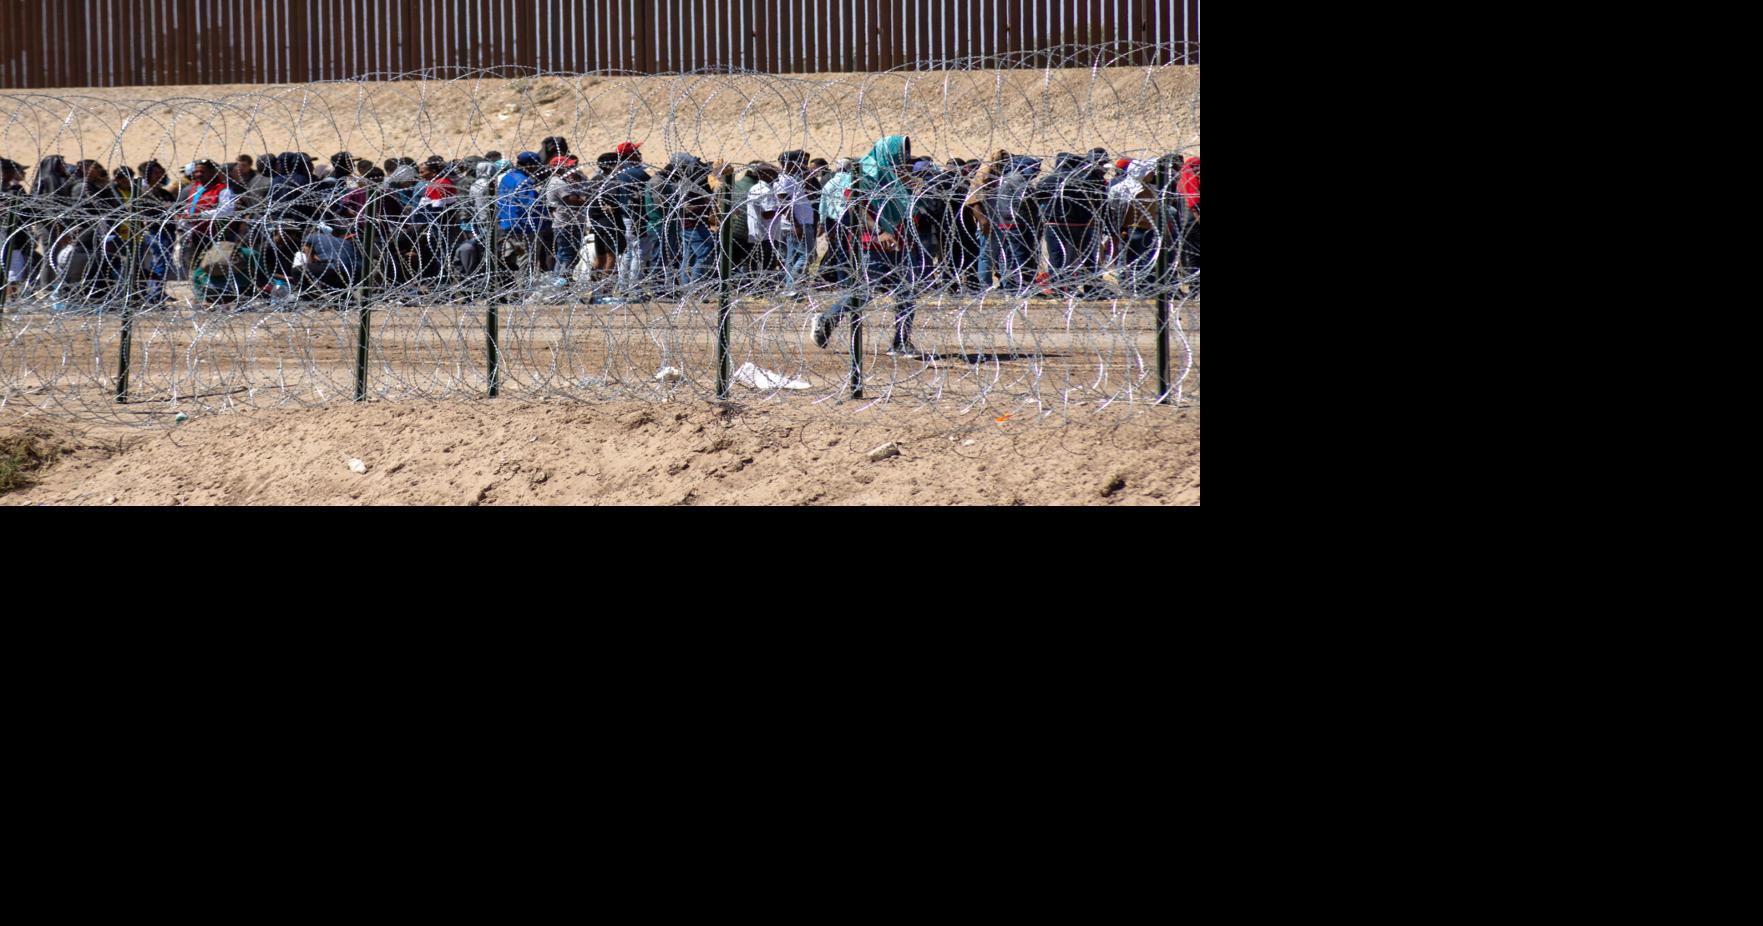 The mayor of Laredo, Texas, has declared a state of emergency due to  migrant influx